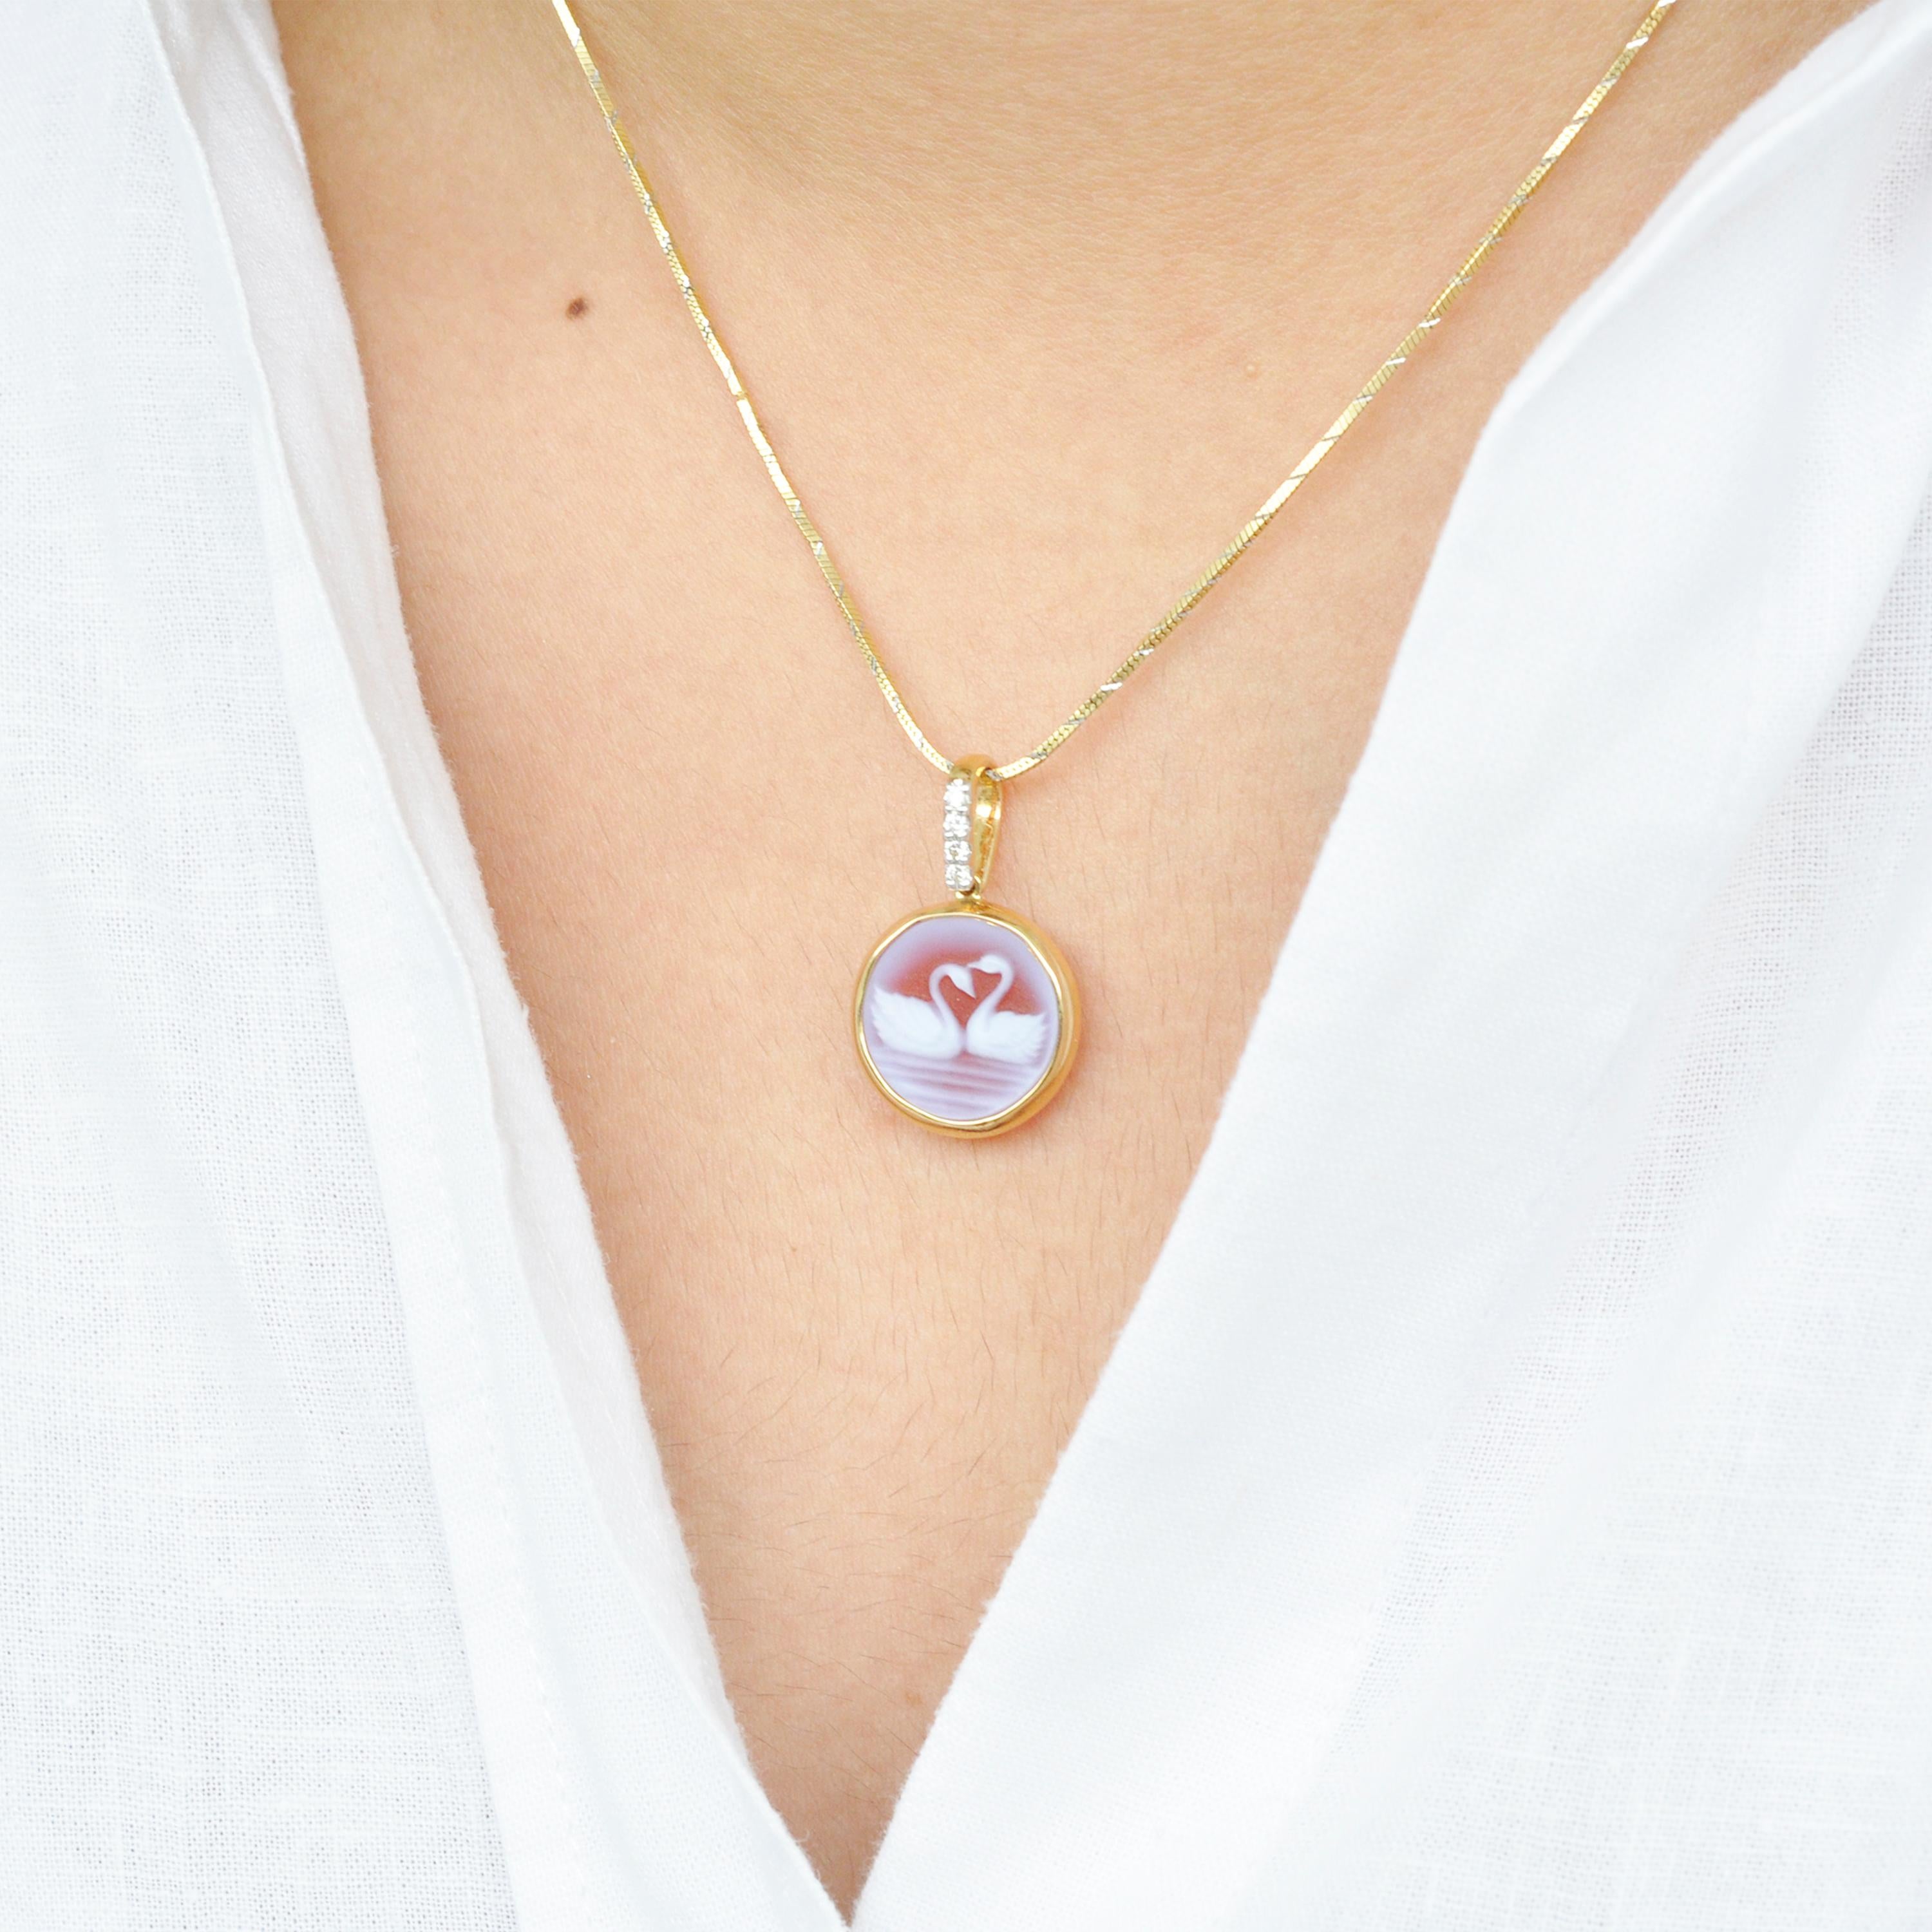 18 karat gold swan natural agate gemstone cameo diamond pendant necklace.

Celebrating love is this beautiful 18 karat gold swan cameo diamond pendant necklace. The pendant is extremely chic and elegant and perfect to be worn everyday. The cameo is